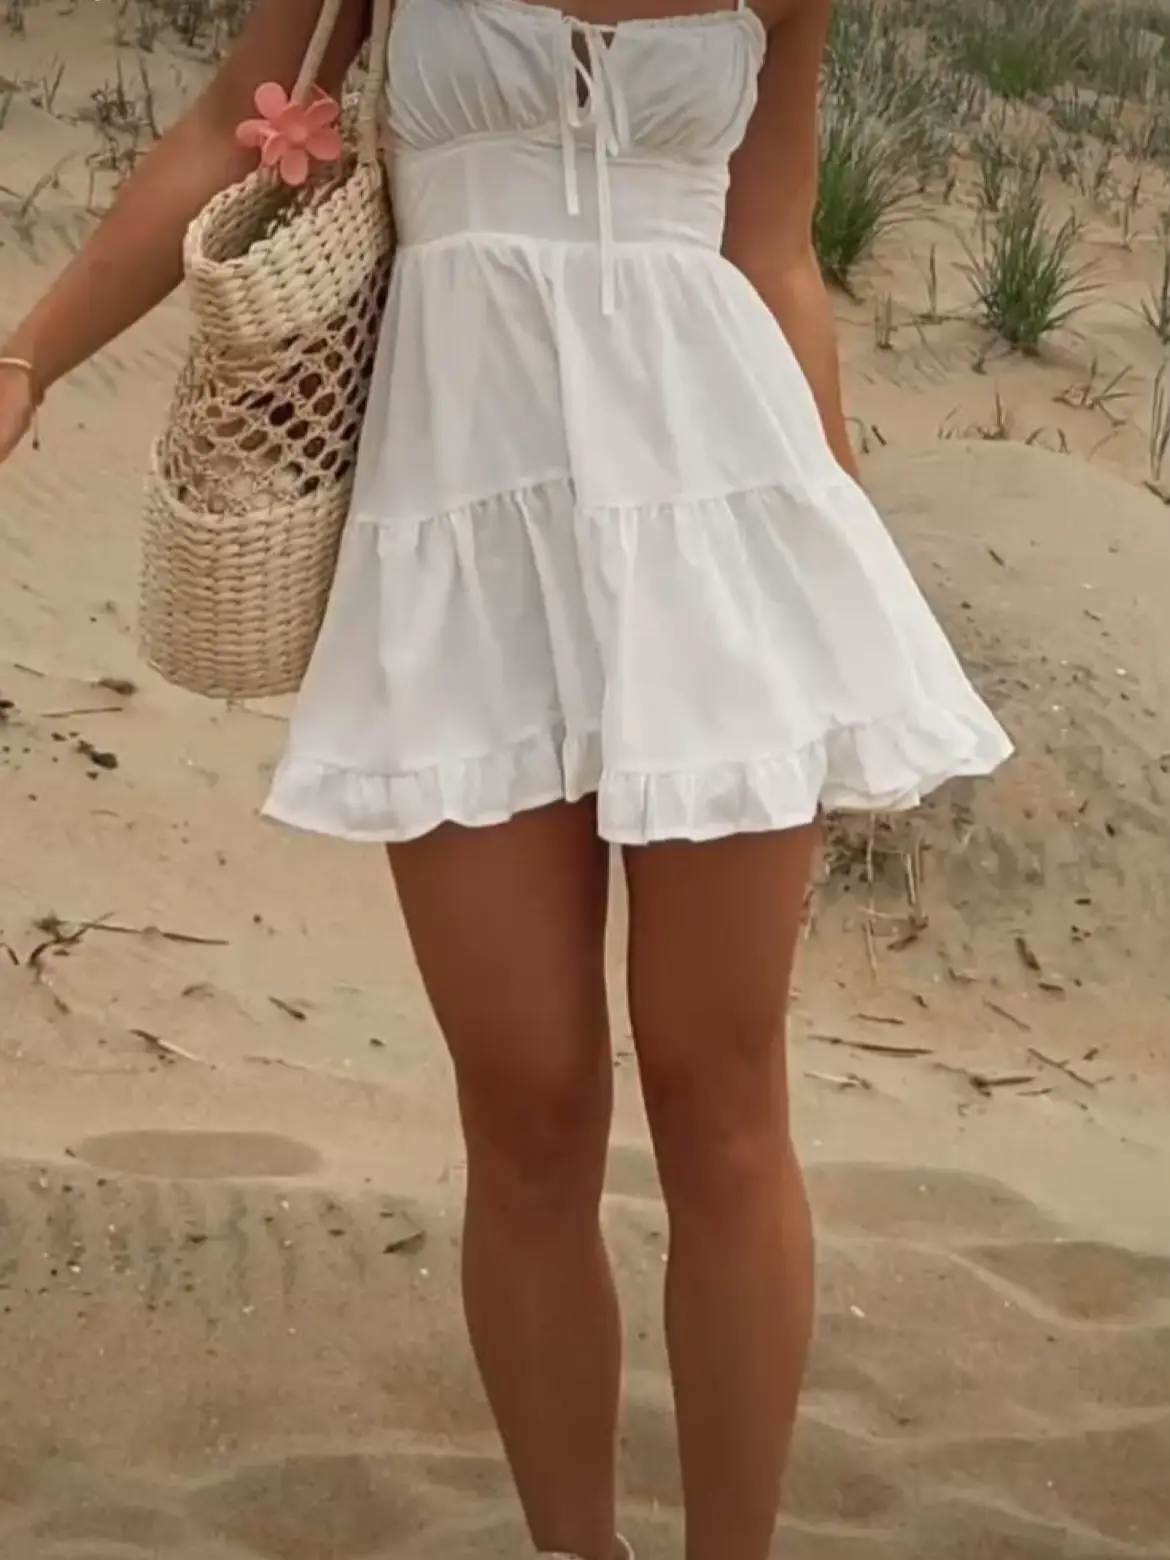  A woman wearing a white dress and white shoes is standing on a beach.